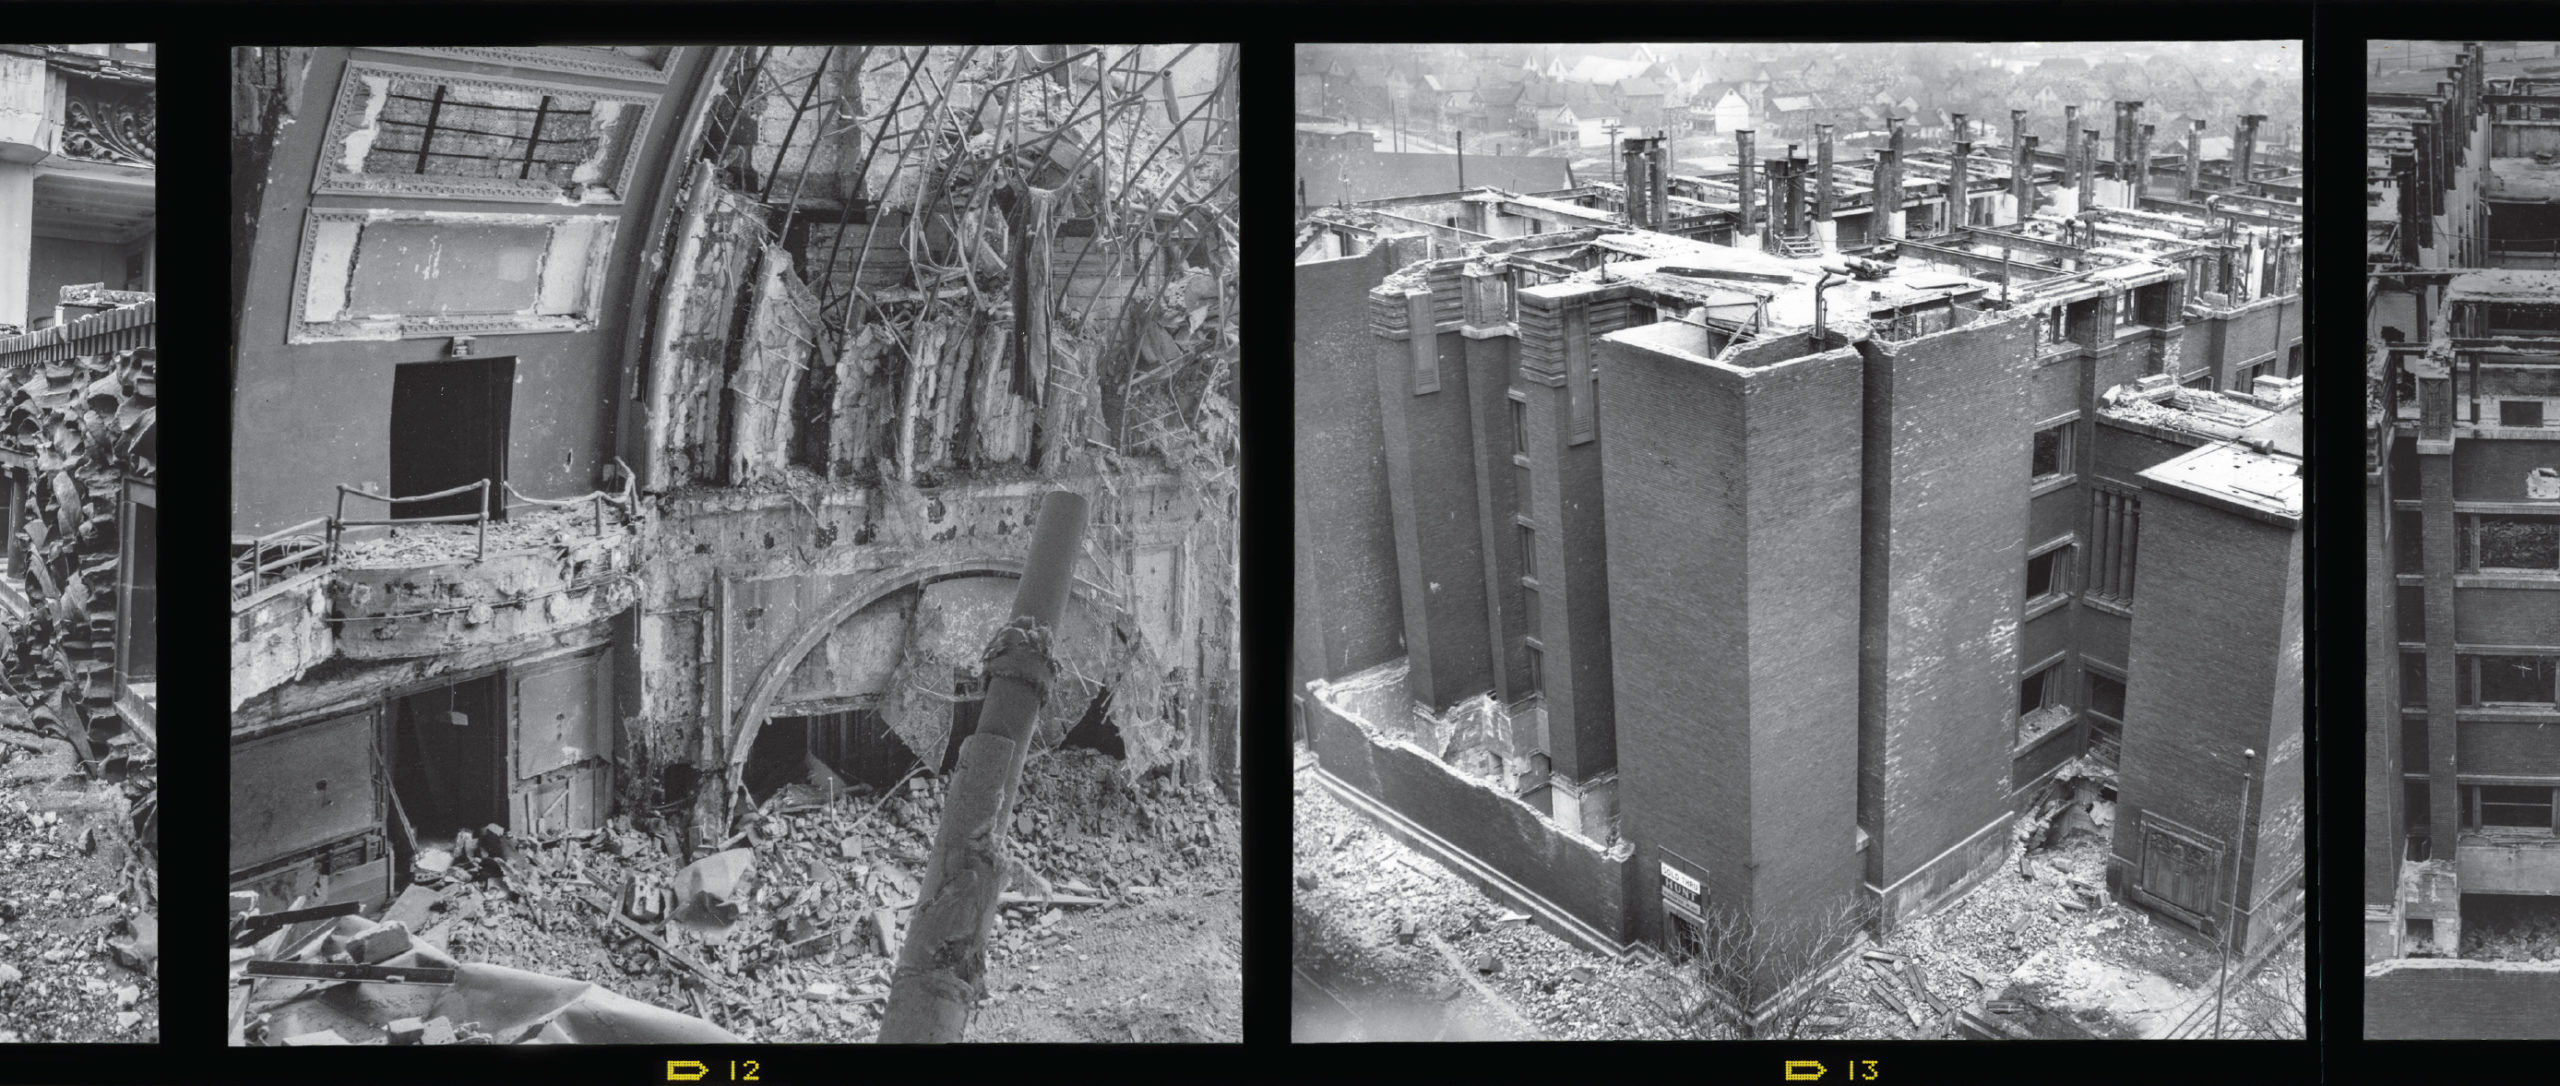 combined image showing photo of Garrick Theatre being demolished and Larkin Administration building being demolished